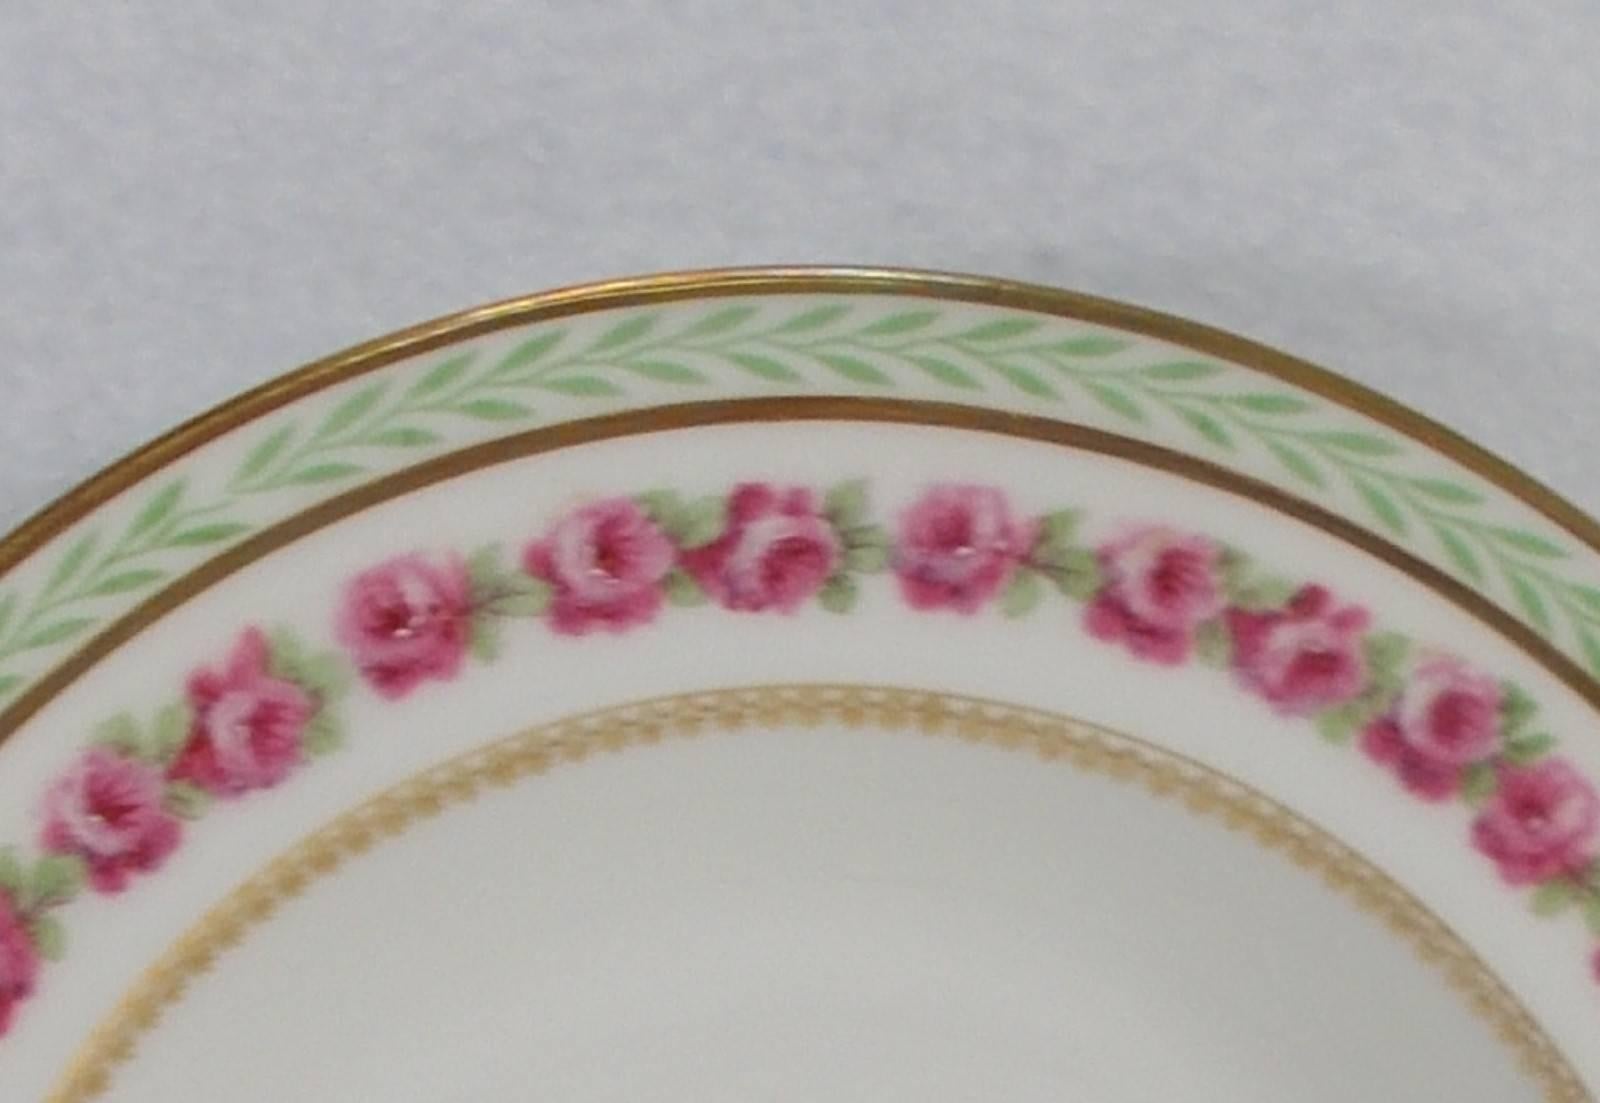 Bernardaud Limoges China BER274 pattern set of 12 soup/salad bowls.

In great condition free from chips, cracks, crazing, and/or stains, with only a minimum of use. 

Pink roses, green laurel. 

Gold bands and trim.

Measure: 8